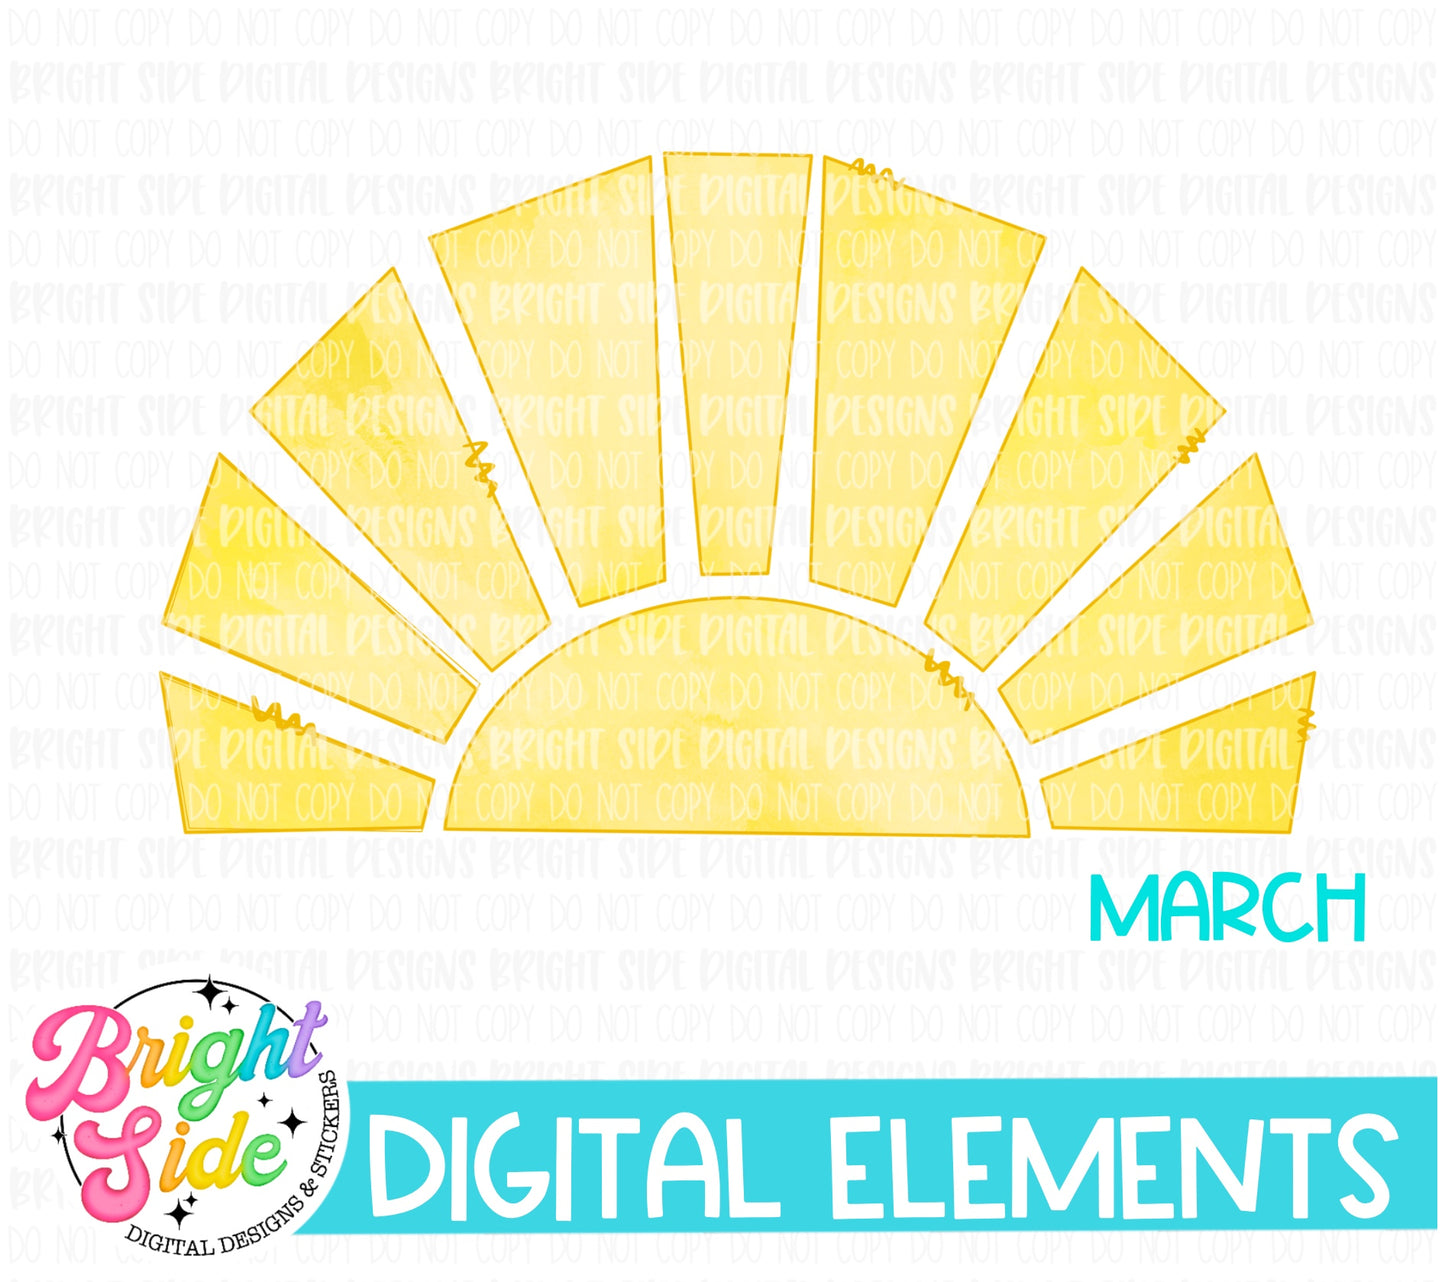 March Elements